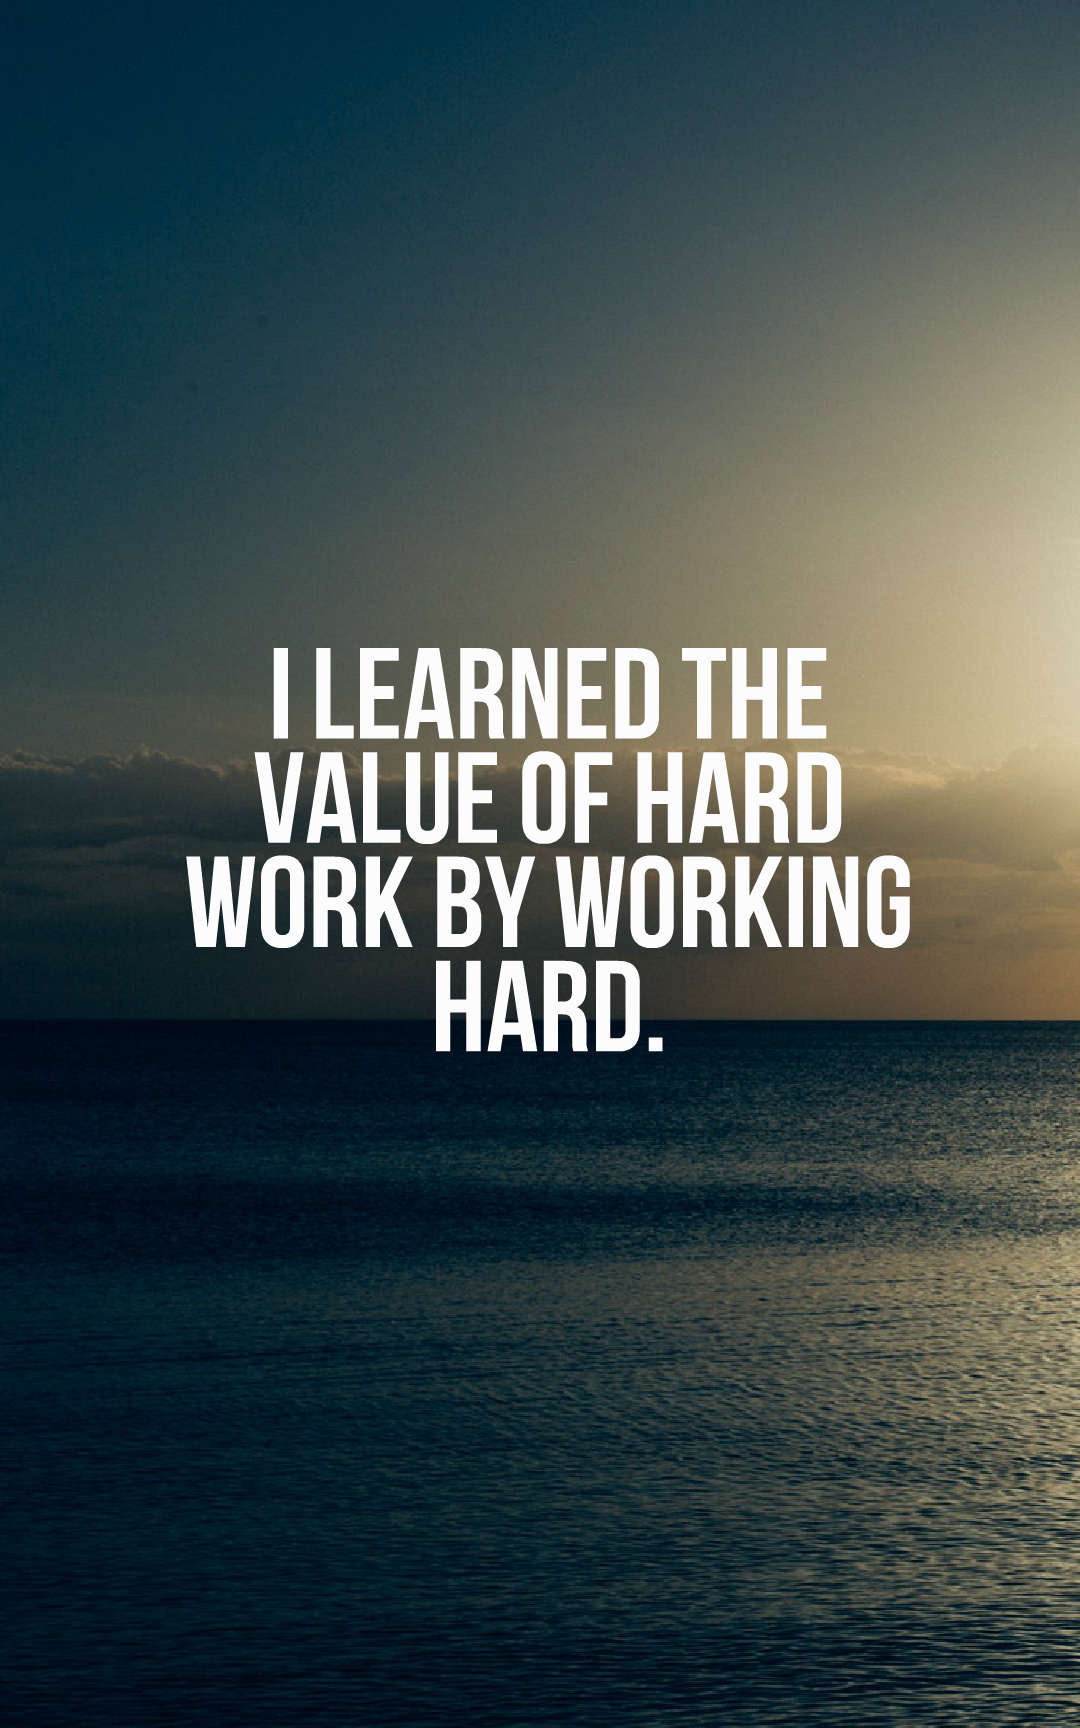 Inspirational Hard Working Quotes
 50 Inspirational Hard Work Quotes And Sayings